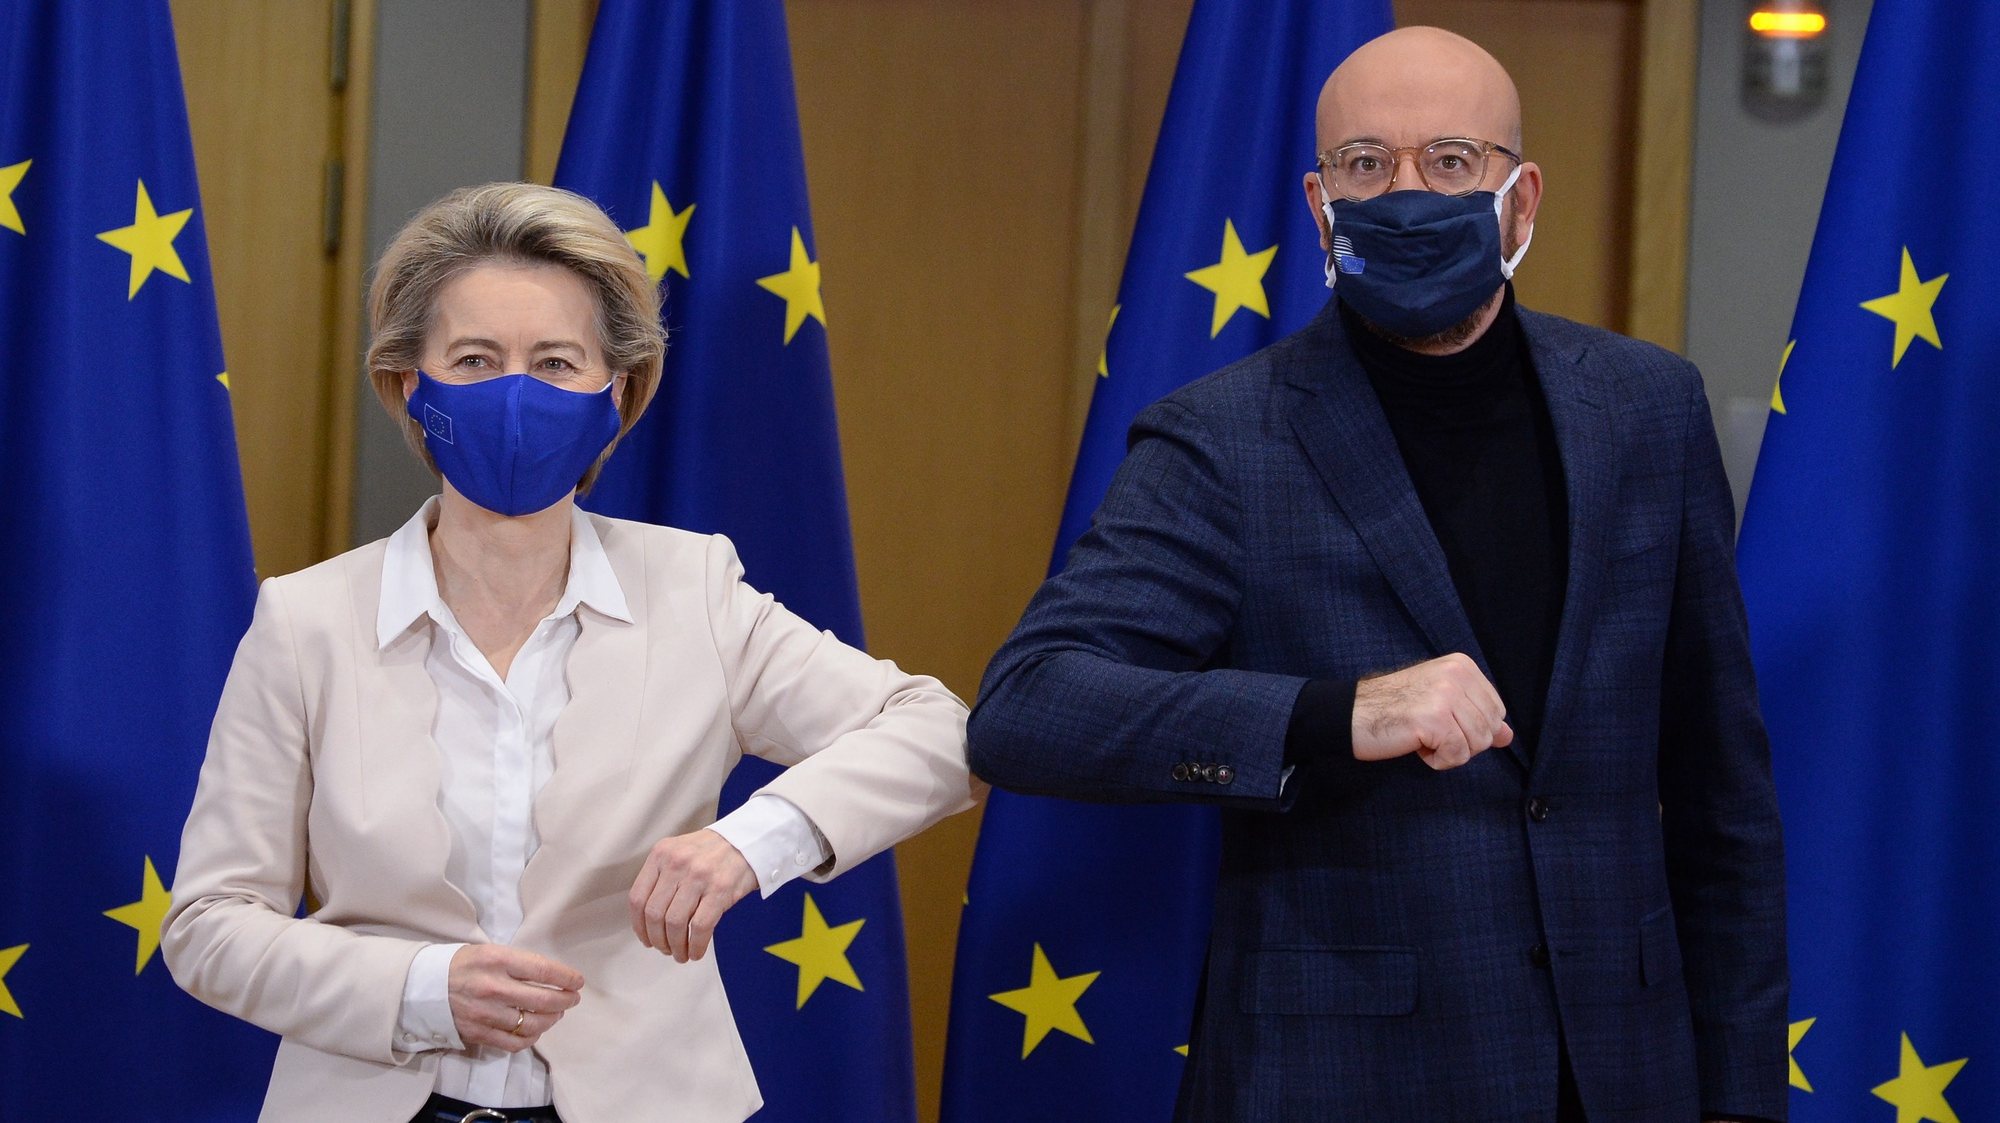 epa08910818 European Commission President Ursula von der Leyen (L) and European Council President Charles Michel bump elbows after signing Brexit trade agreement due to come into force on 01 January 2021, in Brussels, Belgium, 30 December 2020.  EPA/JOHANNA GERON / POOL